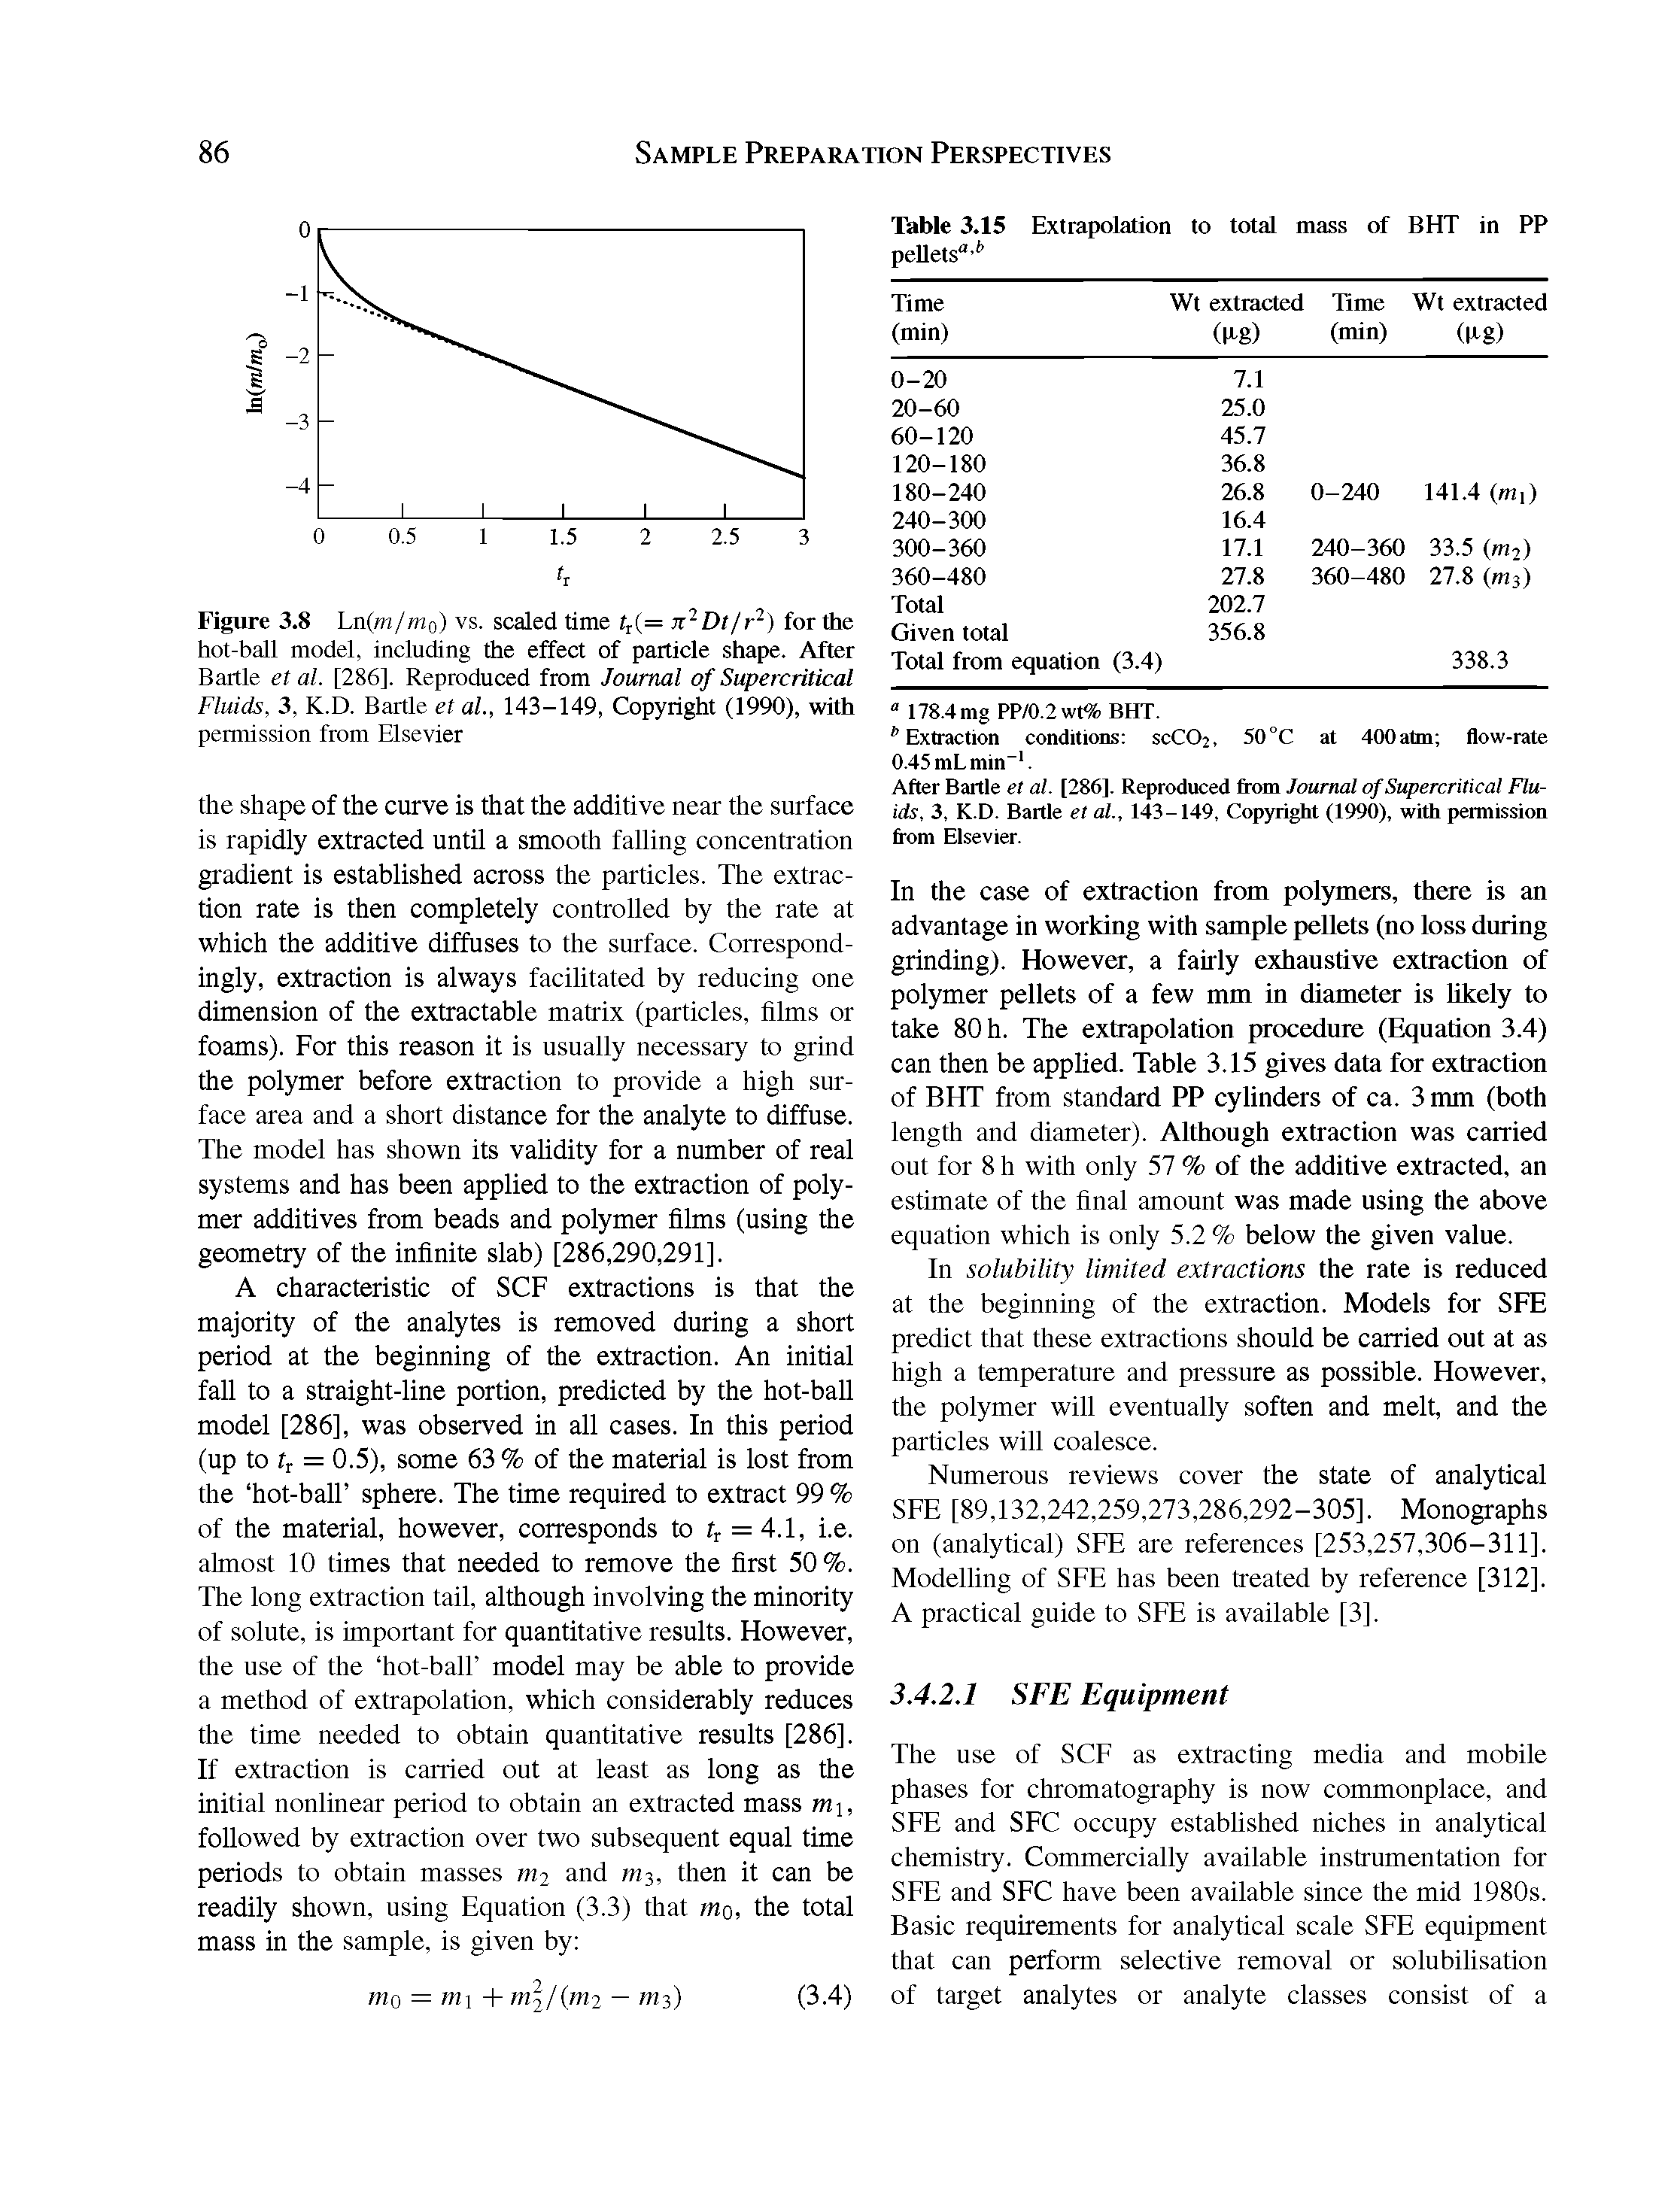 Figure 3.8 Ln(m/m0) vs. scaled time tt(= 7t2Dt/r2) for the hot-ball model, including the effect of particle shape. After Bartle et al. [286]. Reproduced from Journal of Supercritical Fluids, 3, K.D. Bartle et al., 143-149, Copyright (1990), with...